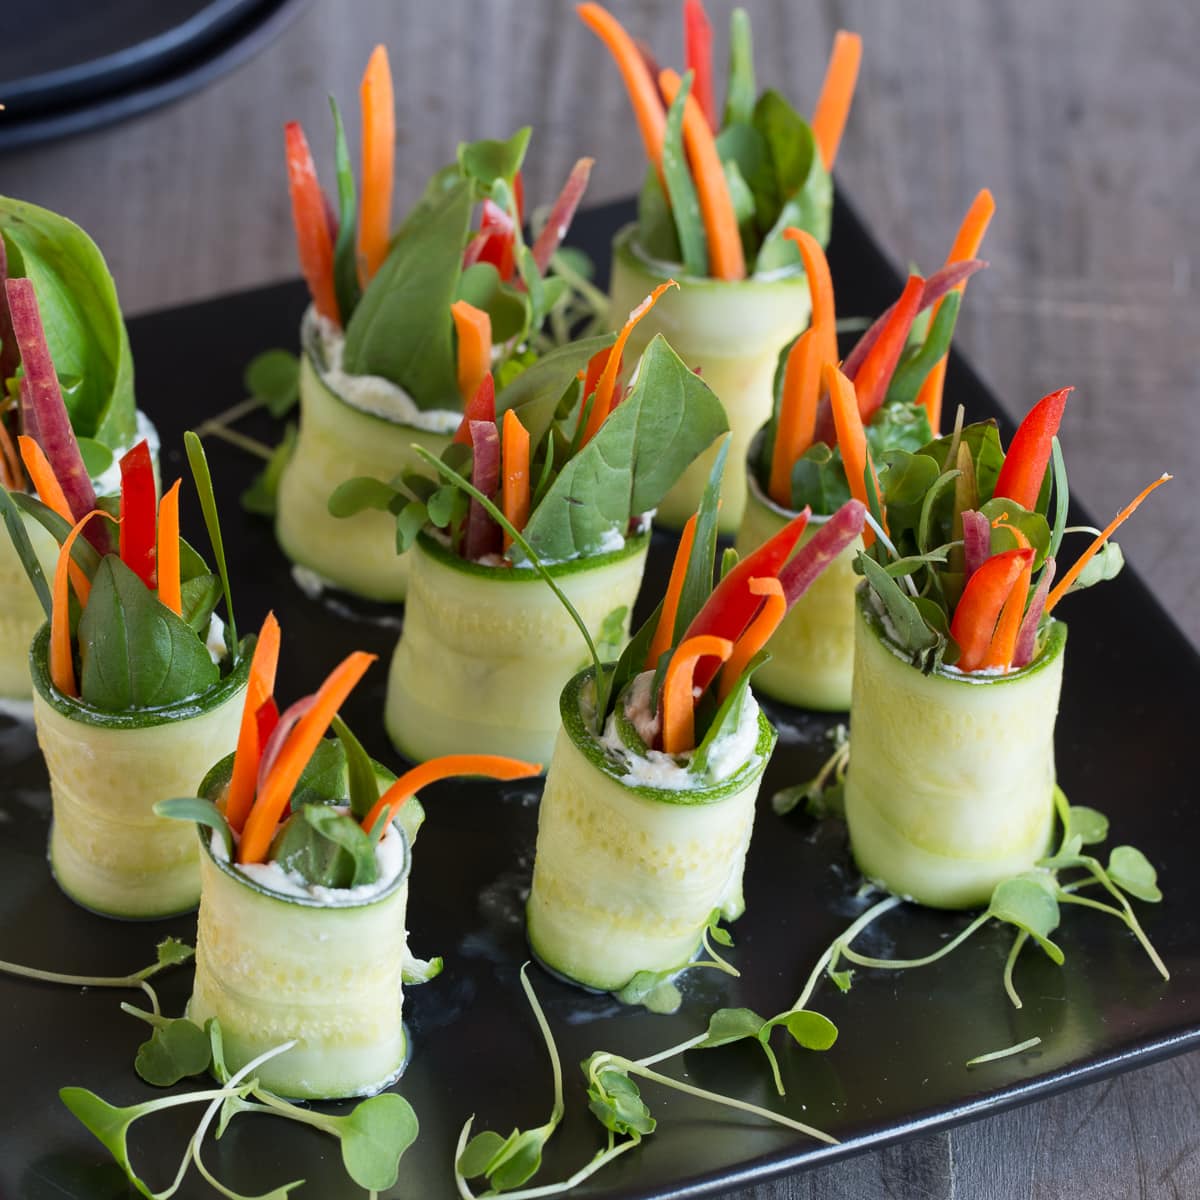 Zucchini Appetizer Rolls with Goat Cheese